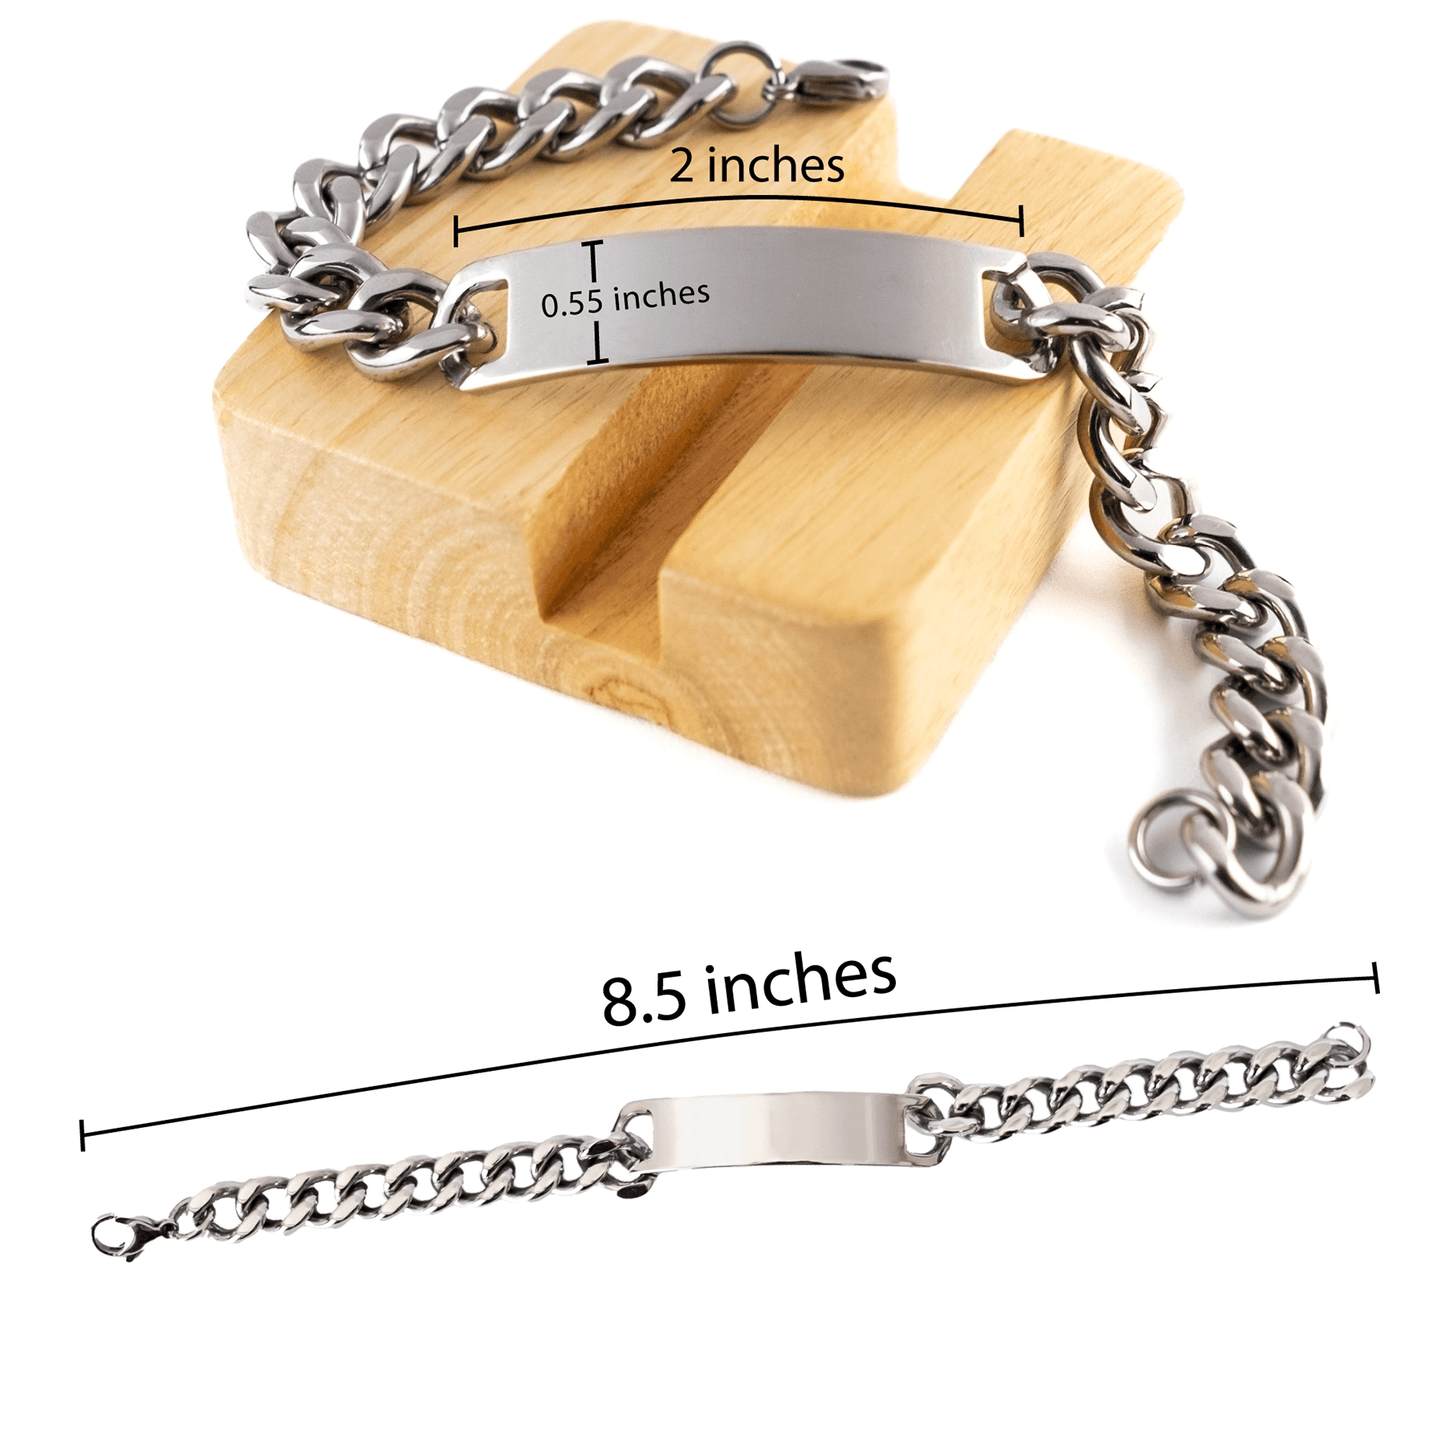 Remarkable Case Manager Gifts, Your dedication and hard work, Inspirational Birthday Christmas Unique Cuban Chain Stainless Steel Bracelet For Case Manager, Coworkers, Men, Women, Friends - Mallard Moon Gift Shop